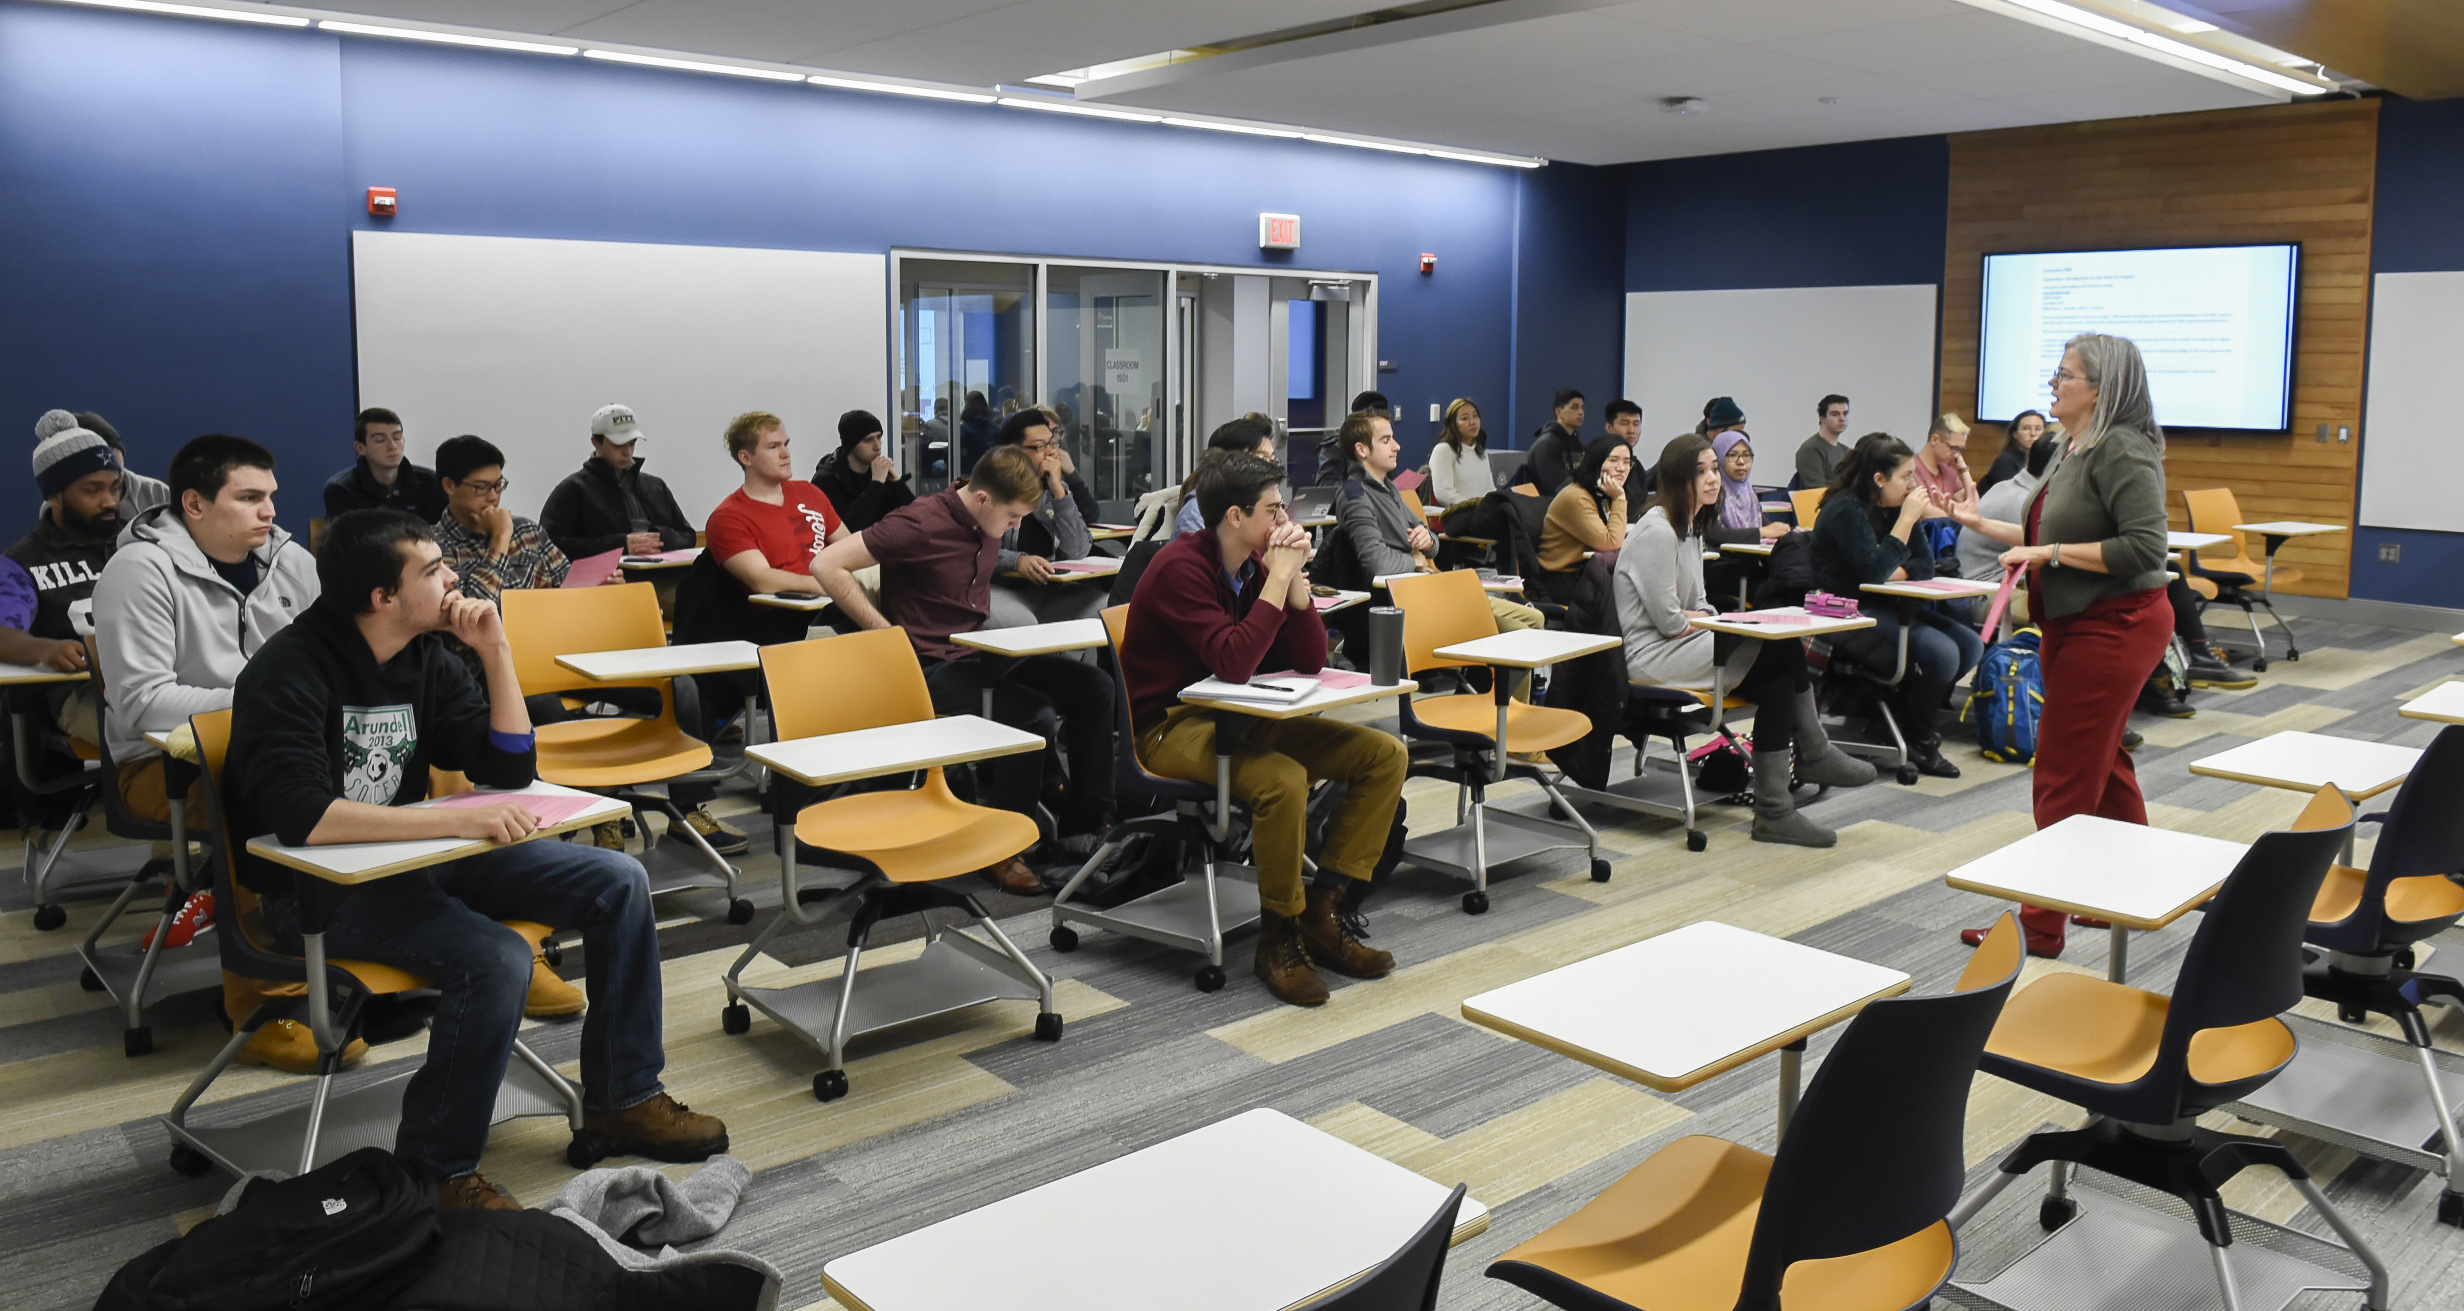 Classroom space fills up quickly during midday peak University Times